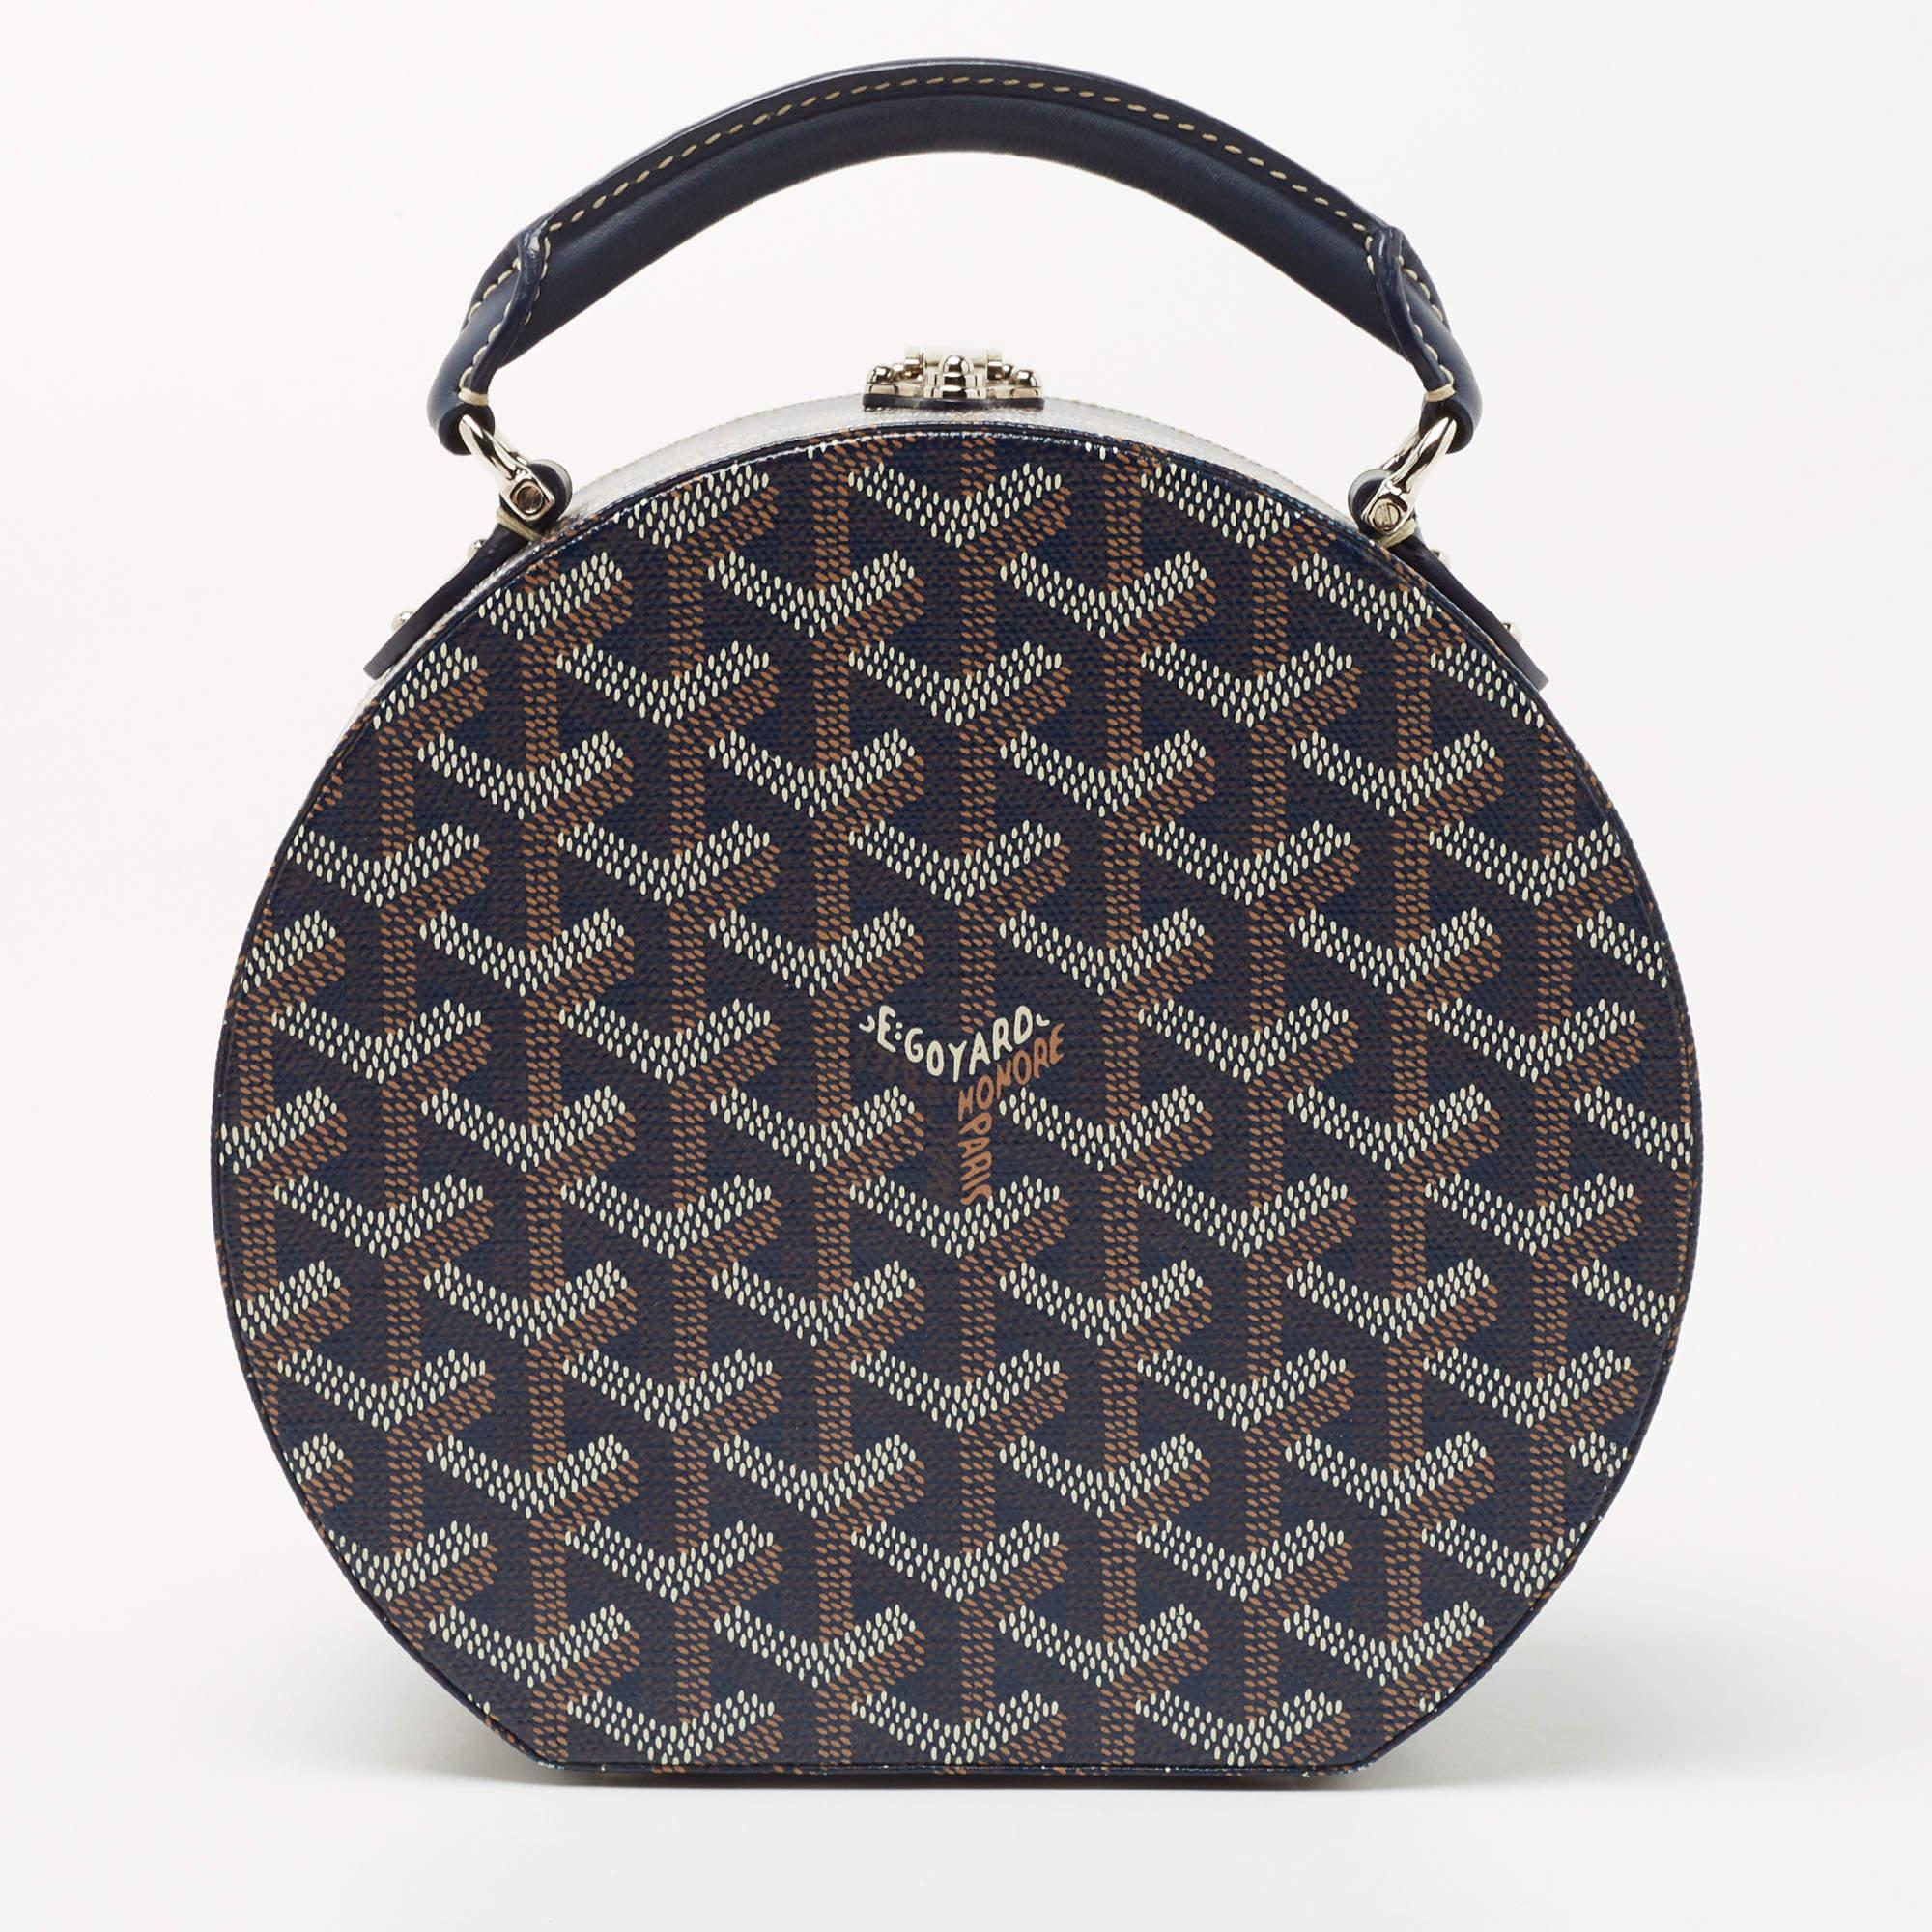 Goyard dives into its rich history of trunk-making to find the inspiration for the Alto hatbox bag. The brand's classic hatbox is transformed into a miniature version—one that is both practical and truly timeless. This Alto hatbox is constructed